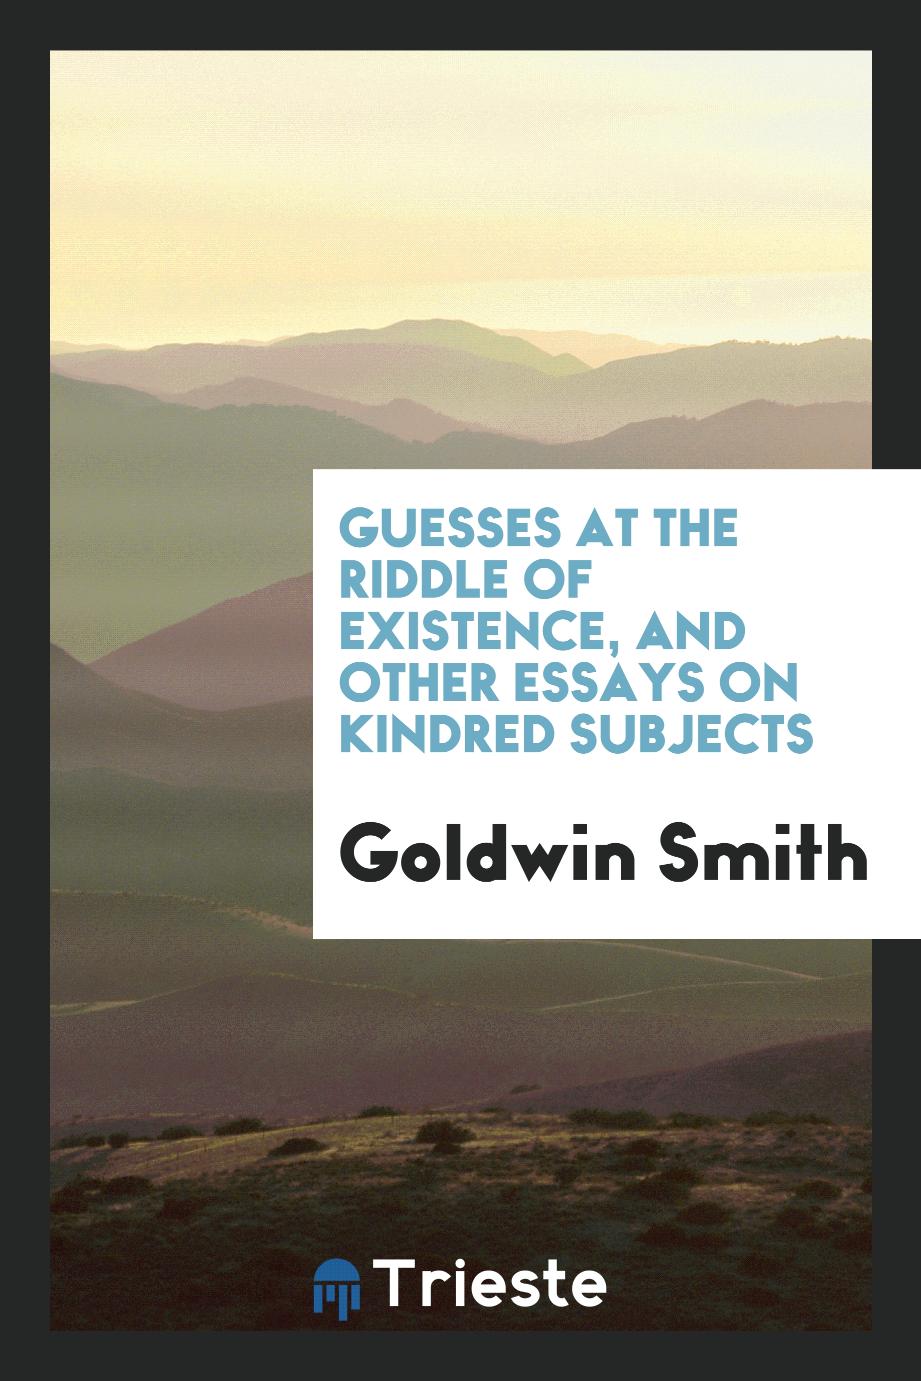 Guesses at the riddle of existence, and other essays on kindred subjects